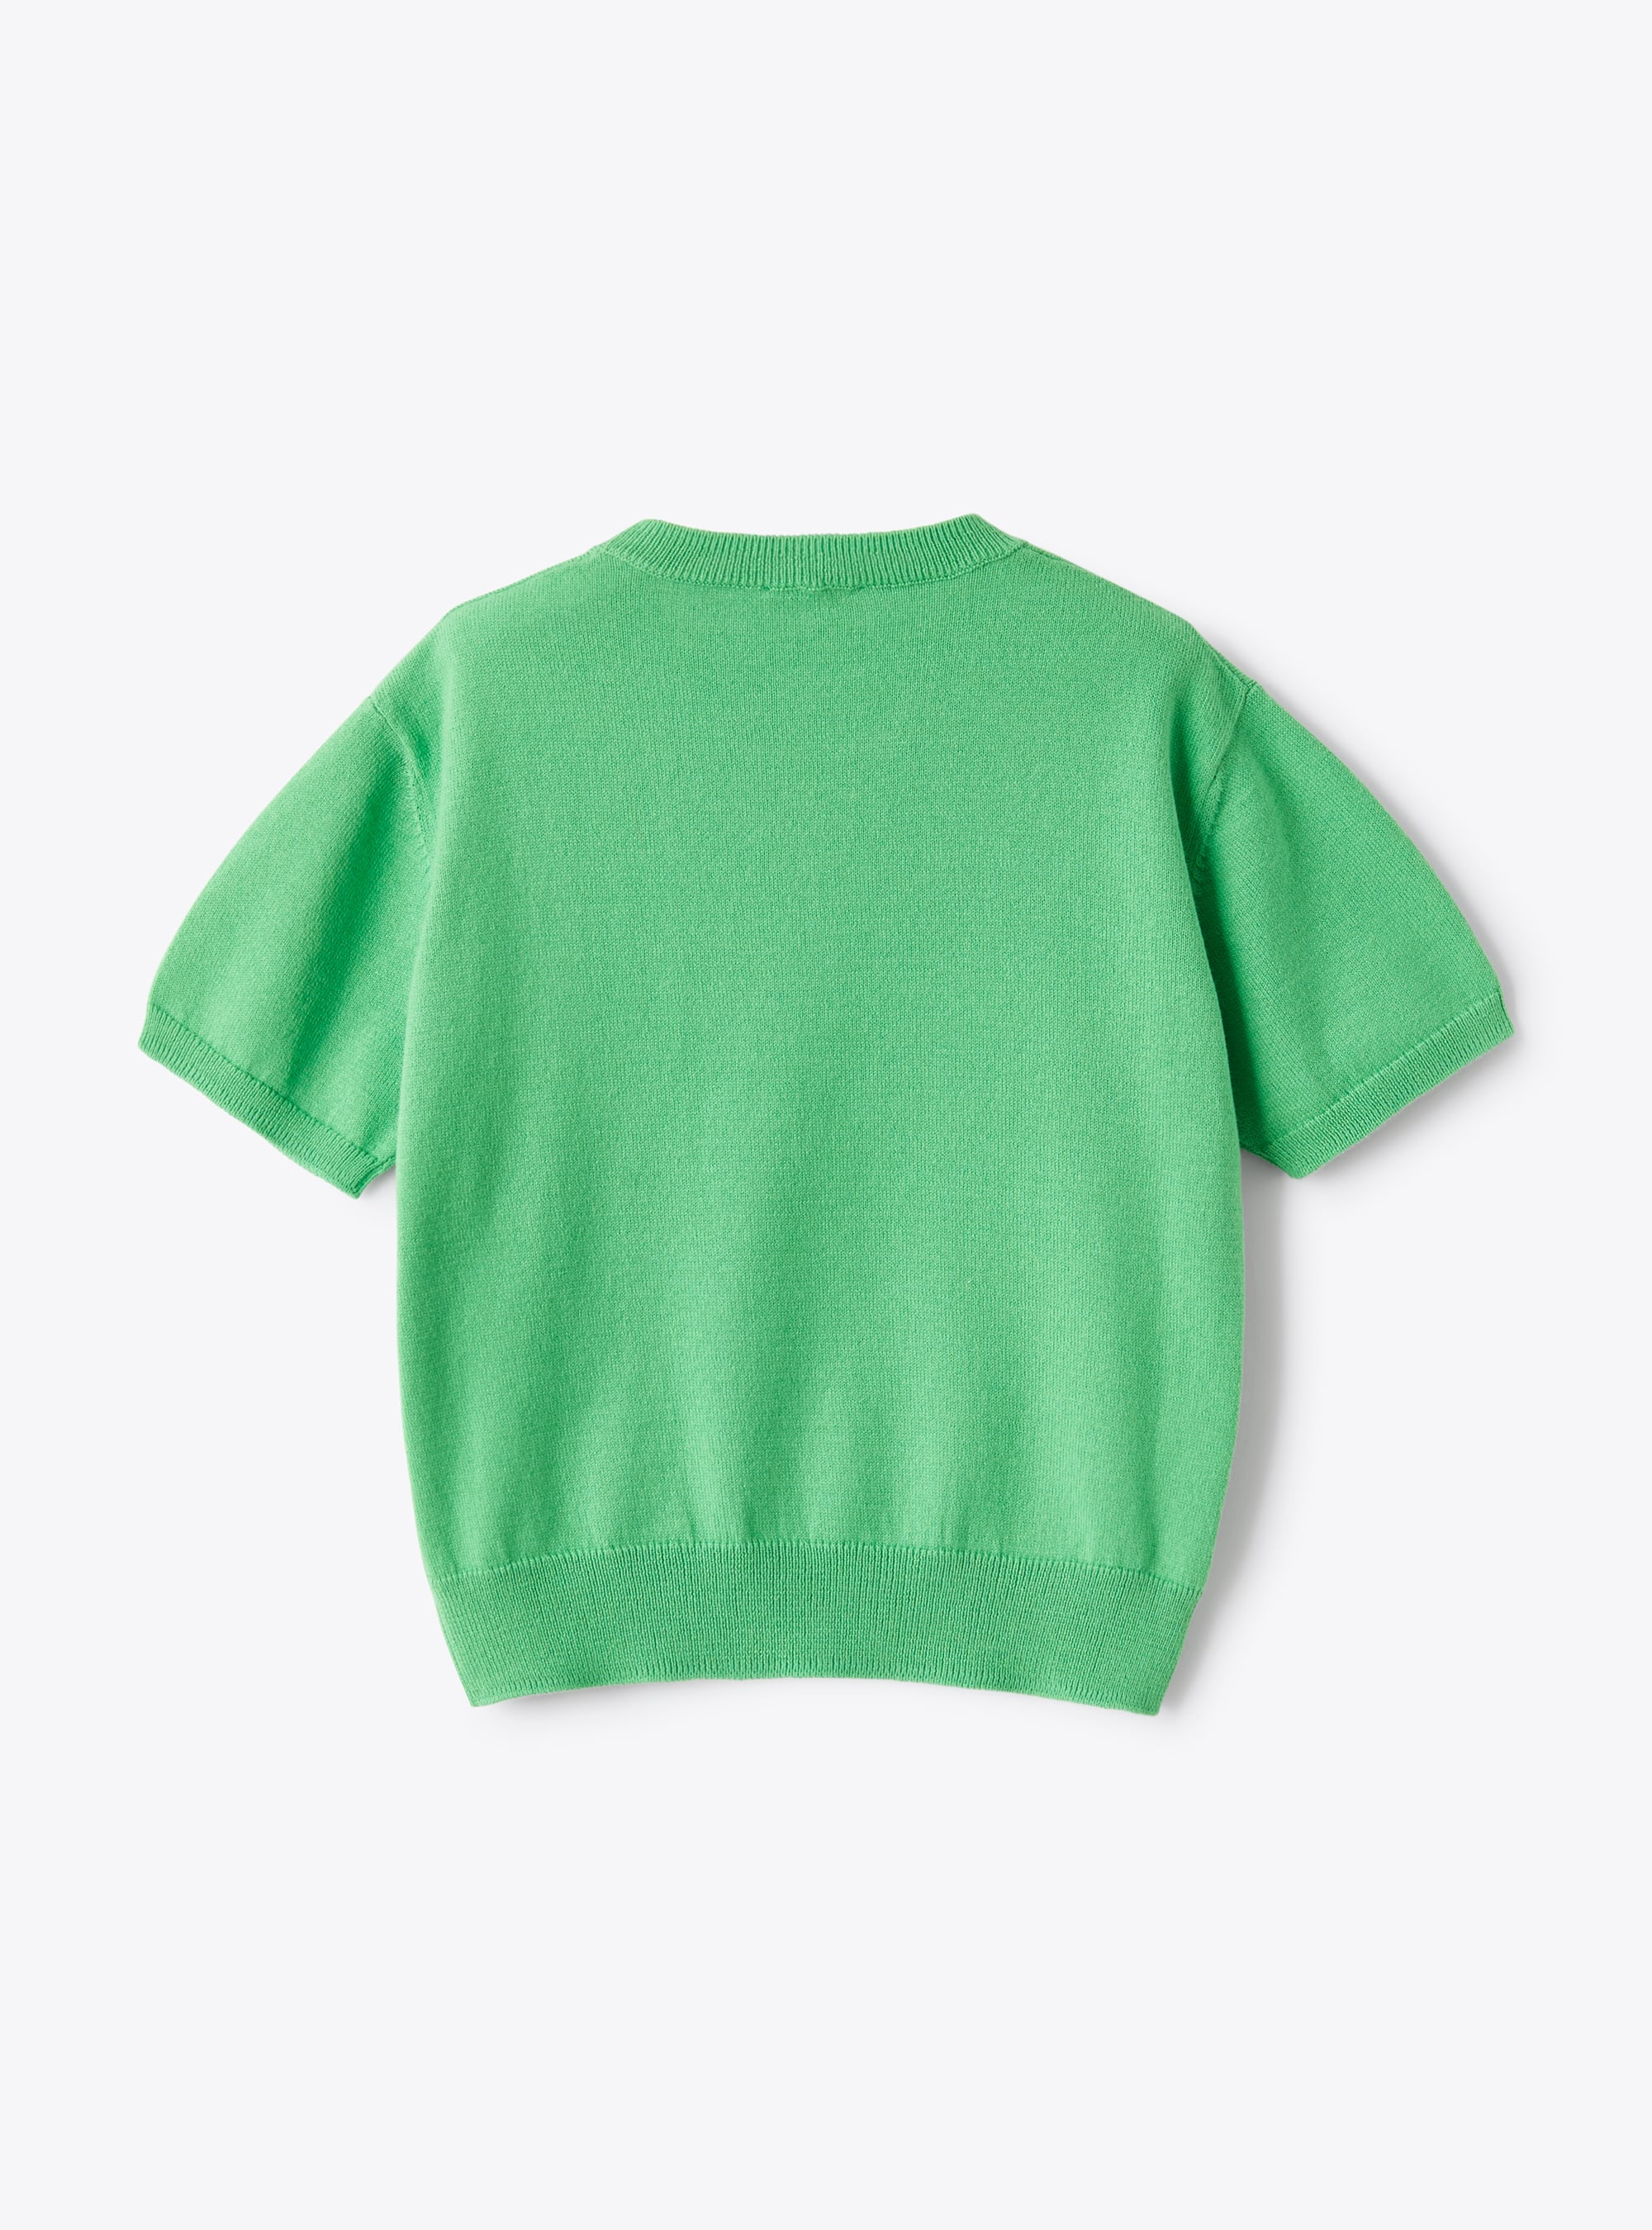 Short-sleeve unisex sweater in organic lime-green cotton - Green | Il Gufo